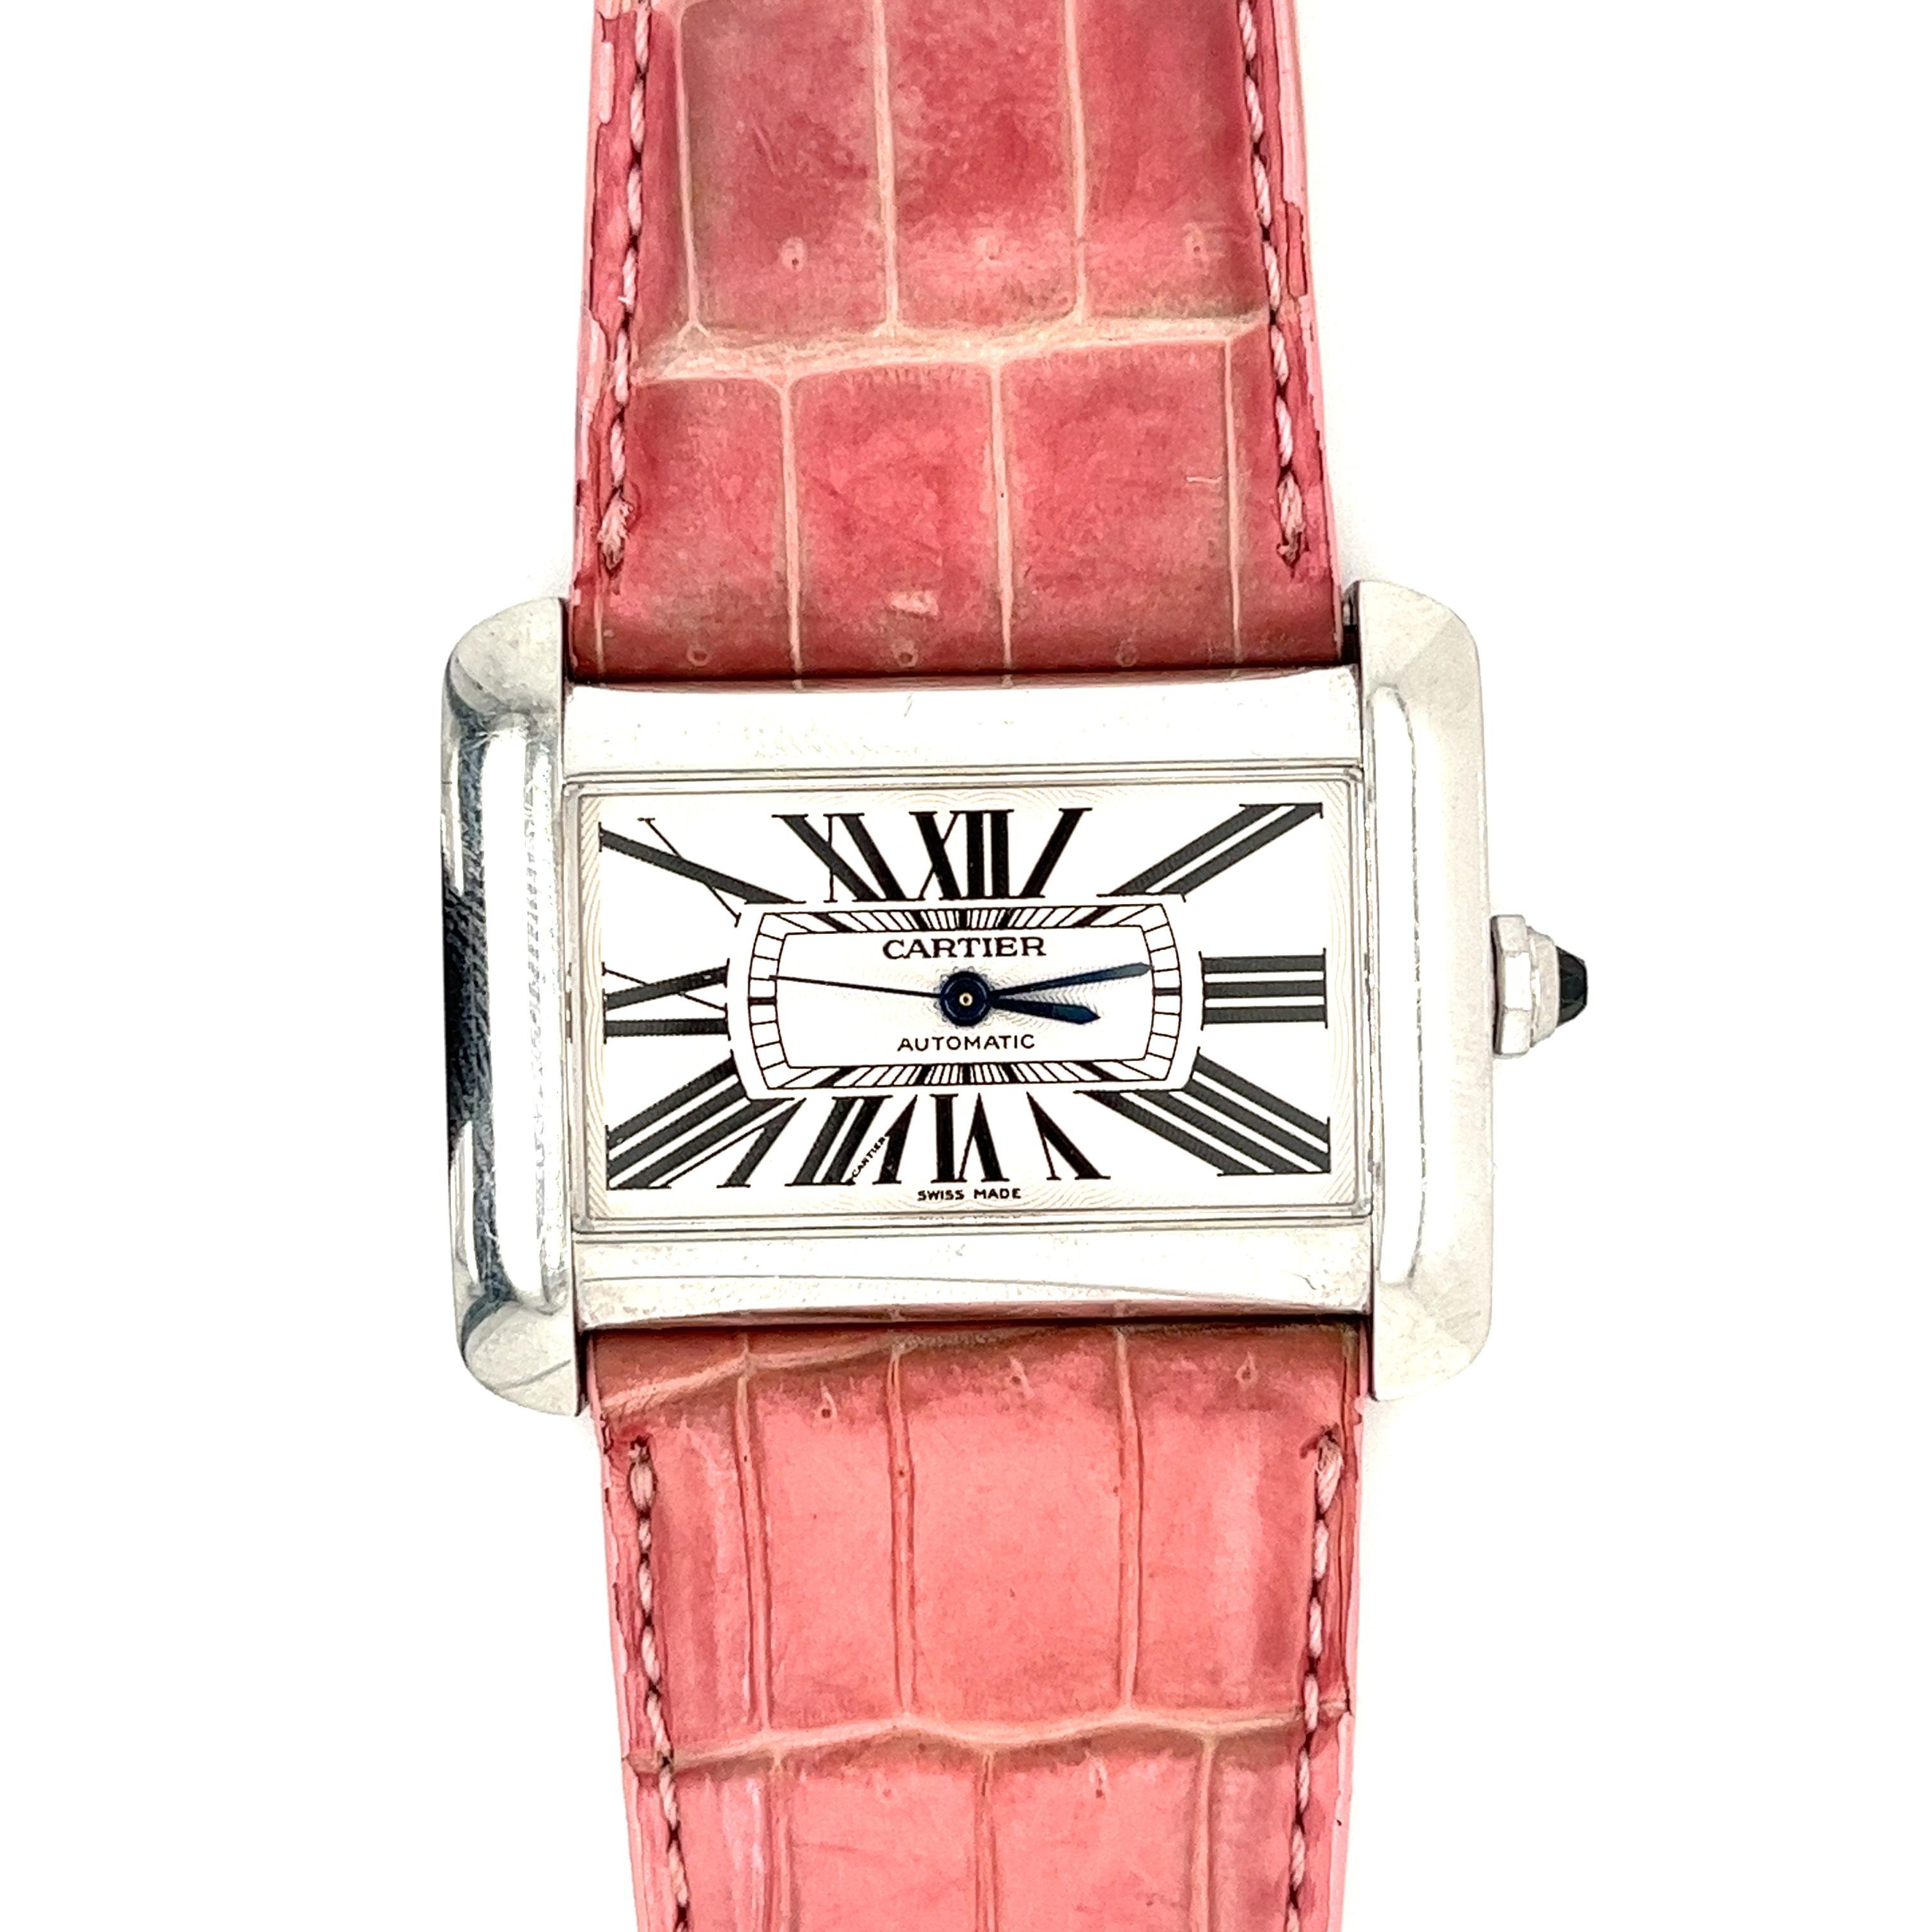 Cartier Automatic Vintage Stainless steel ref. 2612 Divan ser. 1030*** / all original parts / pink leather strap (fits 6.5-8 inch wrist) / 38mm (width) x 30mm (height) dial / 8.3mm thick. 																					

Pre-Owned Cartier Divan ref. 2612